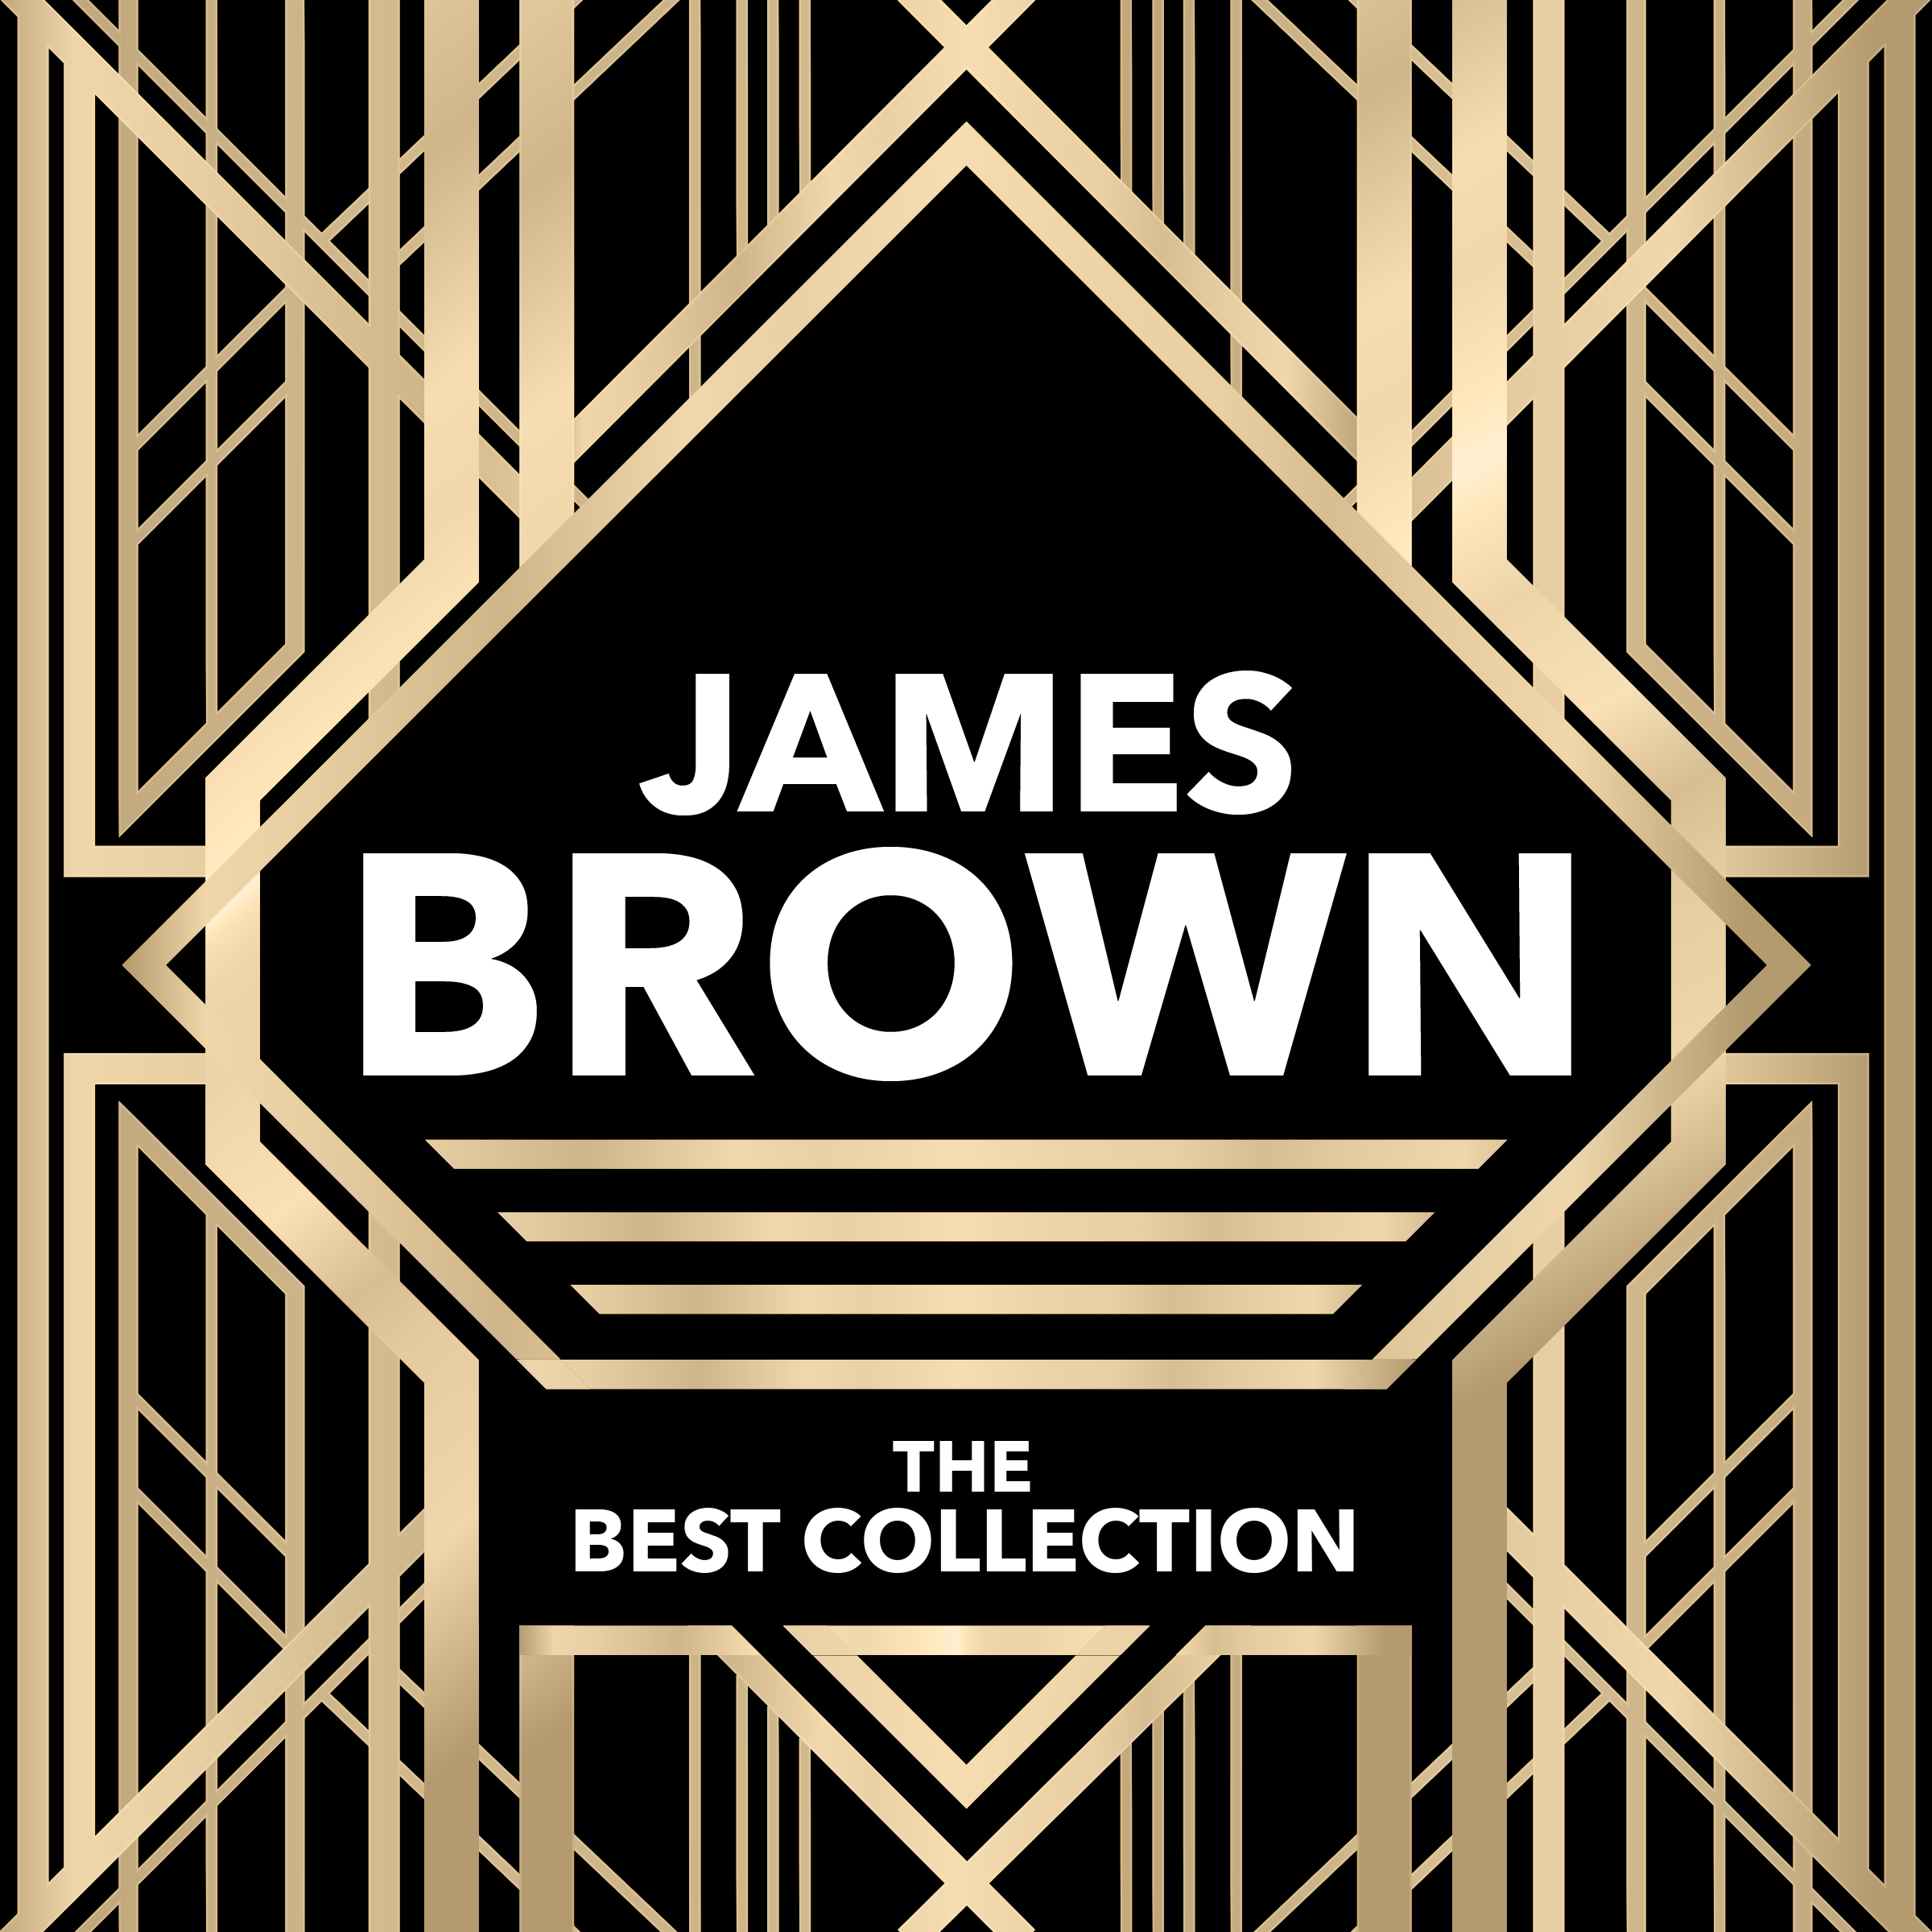 James Brown - The Best Collection